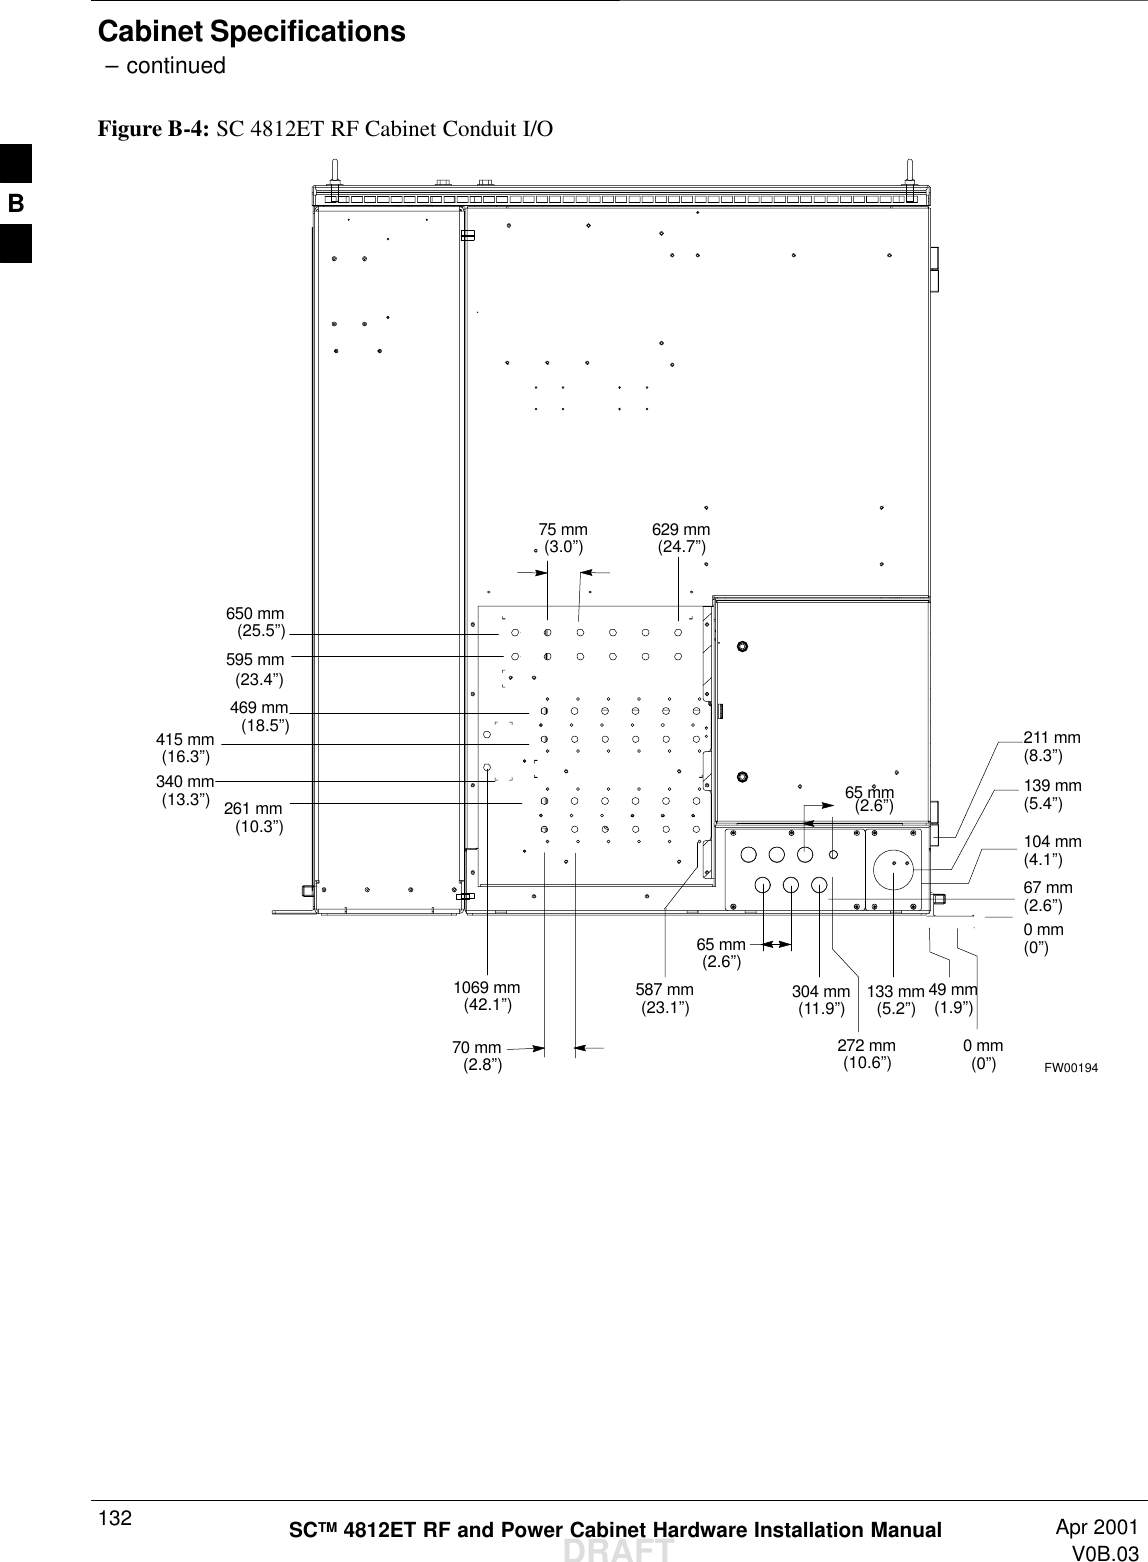 Cabinet Specifications – continuedDRAFTSCTM 4812ET RF and Power Cabinet Hardware Installation Manual Apr 2001V0B.031320 mm(0”)49 mm(1.9”)133 mm(5.2”)272 mm(10.6”)304 mm(11.9”)67 mm(2.6”)104 mm(4.1”)139 mm(5.4”)65 mm(2.6”)65 mm(2.6”)261 mm(10.3”)469 mm(18.5”)587 mm(23.1”)70 mm(2.8”)Figure B-4: SC 4812ET RF Cabinet Conduit I/O0 mm(0”)650 mm(25.5”)595 mm(23.4”)75 mm(3.0”)629 mm(24.7”)415 mm(16.3”)340 mm(13.3”)1069 mm(42.1”)FW00194211 mm(8.3”)B